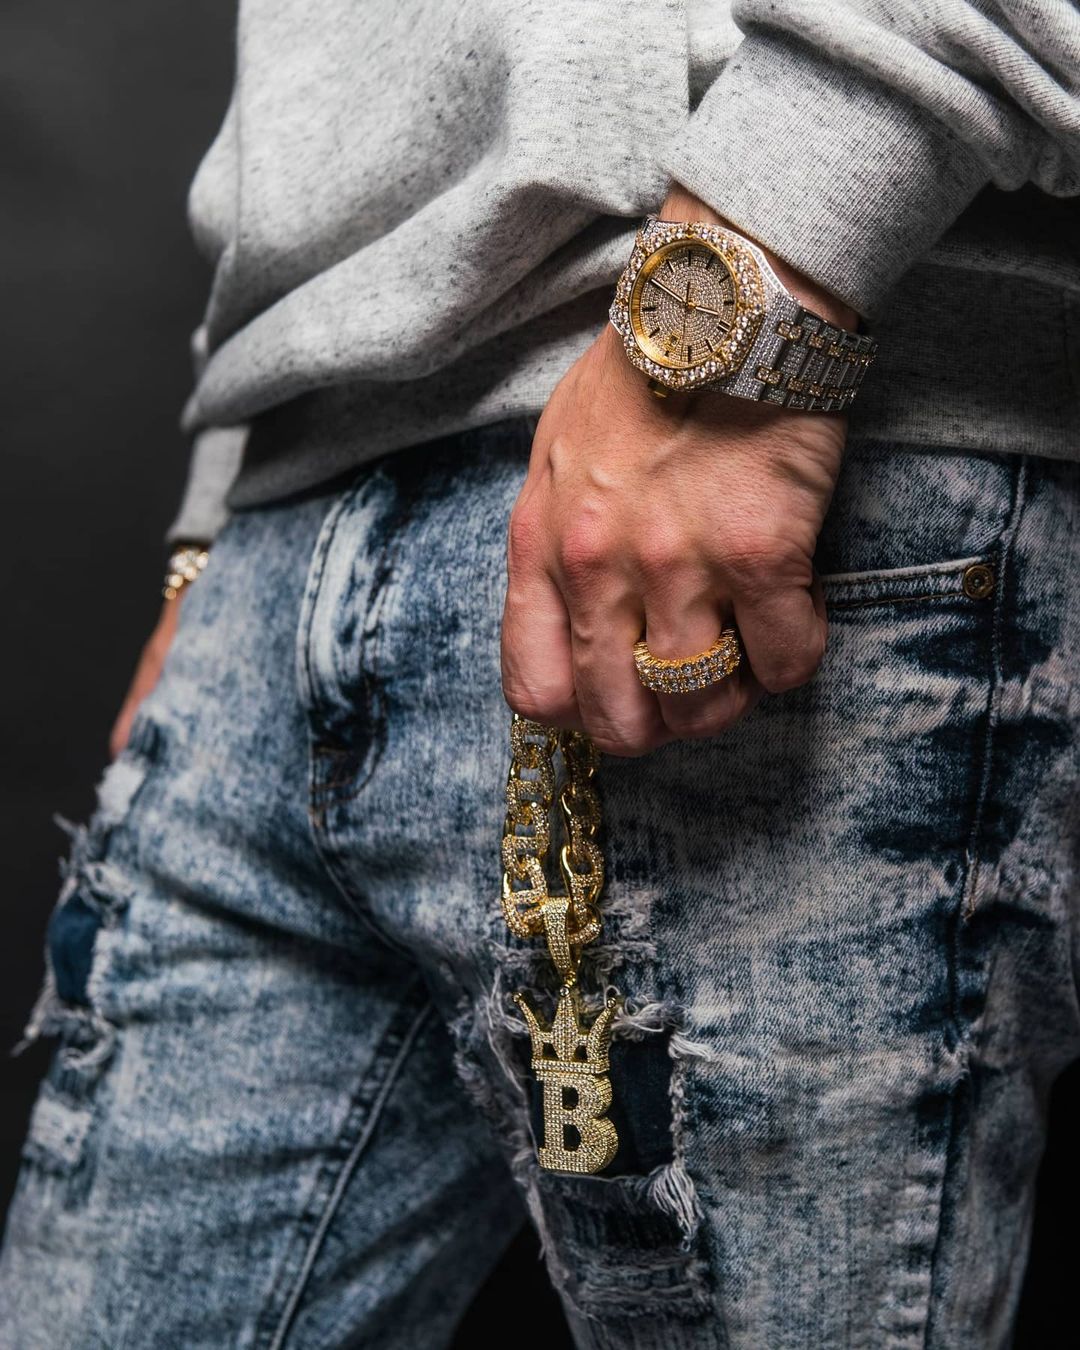 Real recognizes real, you feel? Discover the best hip hop jewelry at HipHopBling.com